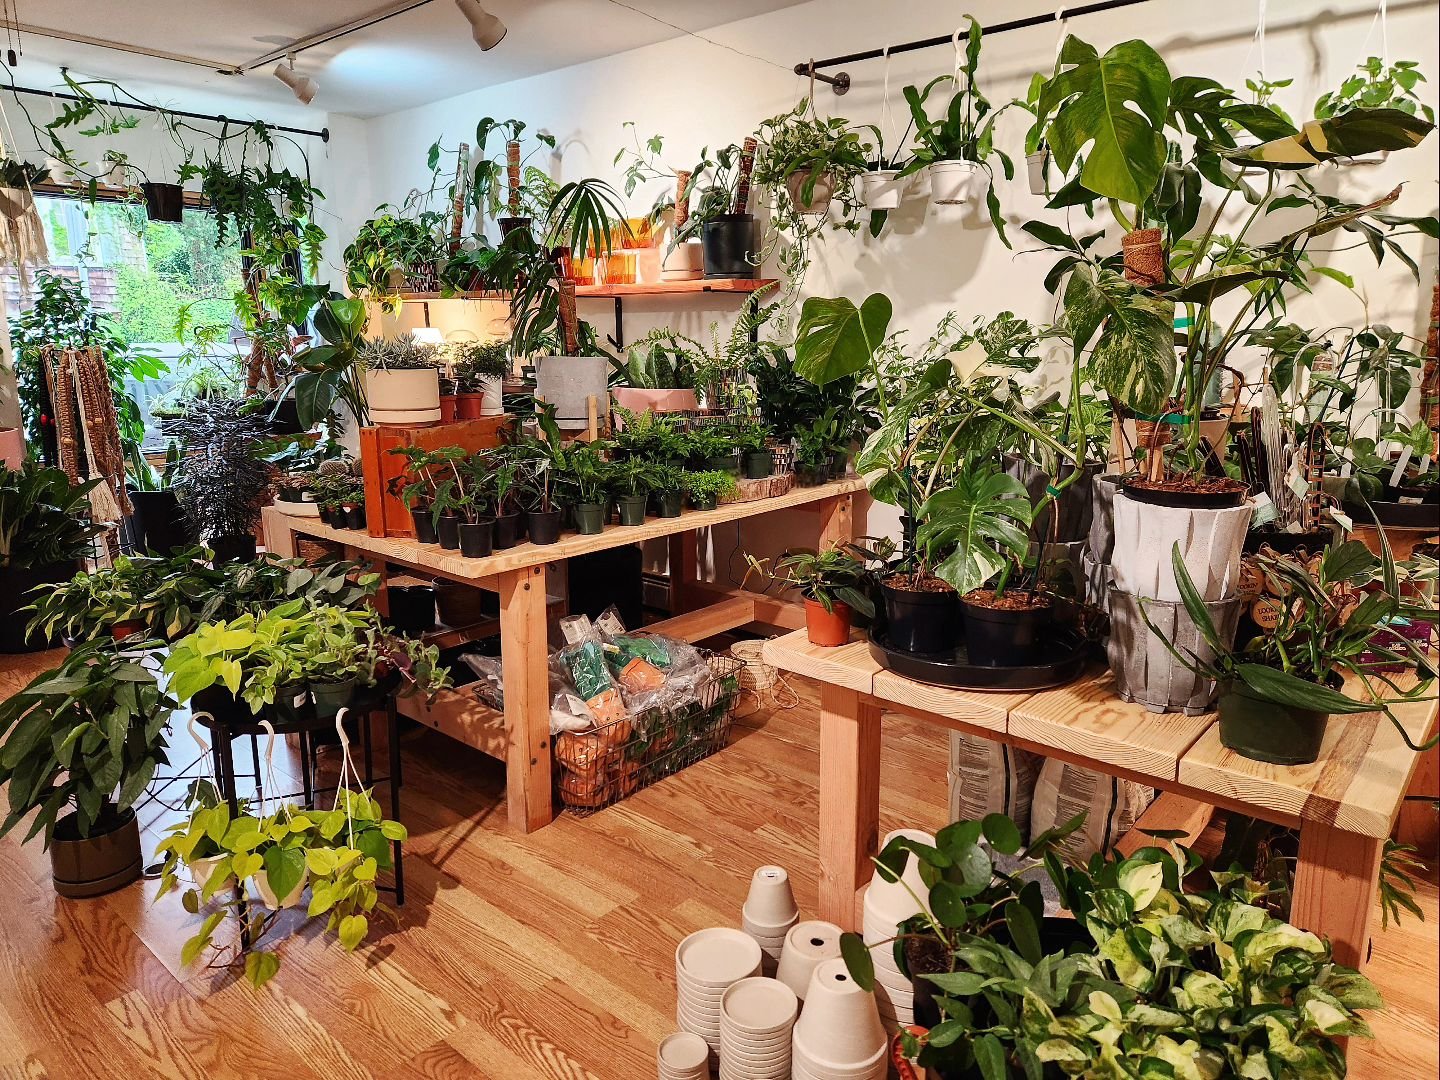 We're Mother's Day ready! 🌿🖤

You have 10 days to get your mom the perfect gift!! 🪴

Open from 11 am to 6 pm today!

See you soon!
.
.

#shoplocal
#shopsmall
#shoplongisland 
#mothersday 
#wildportjeff 
#houseplantshop 
#plantshop 
#portjefferson 